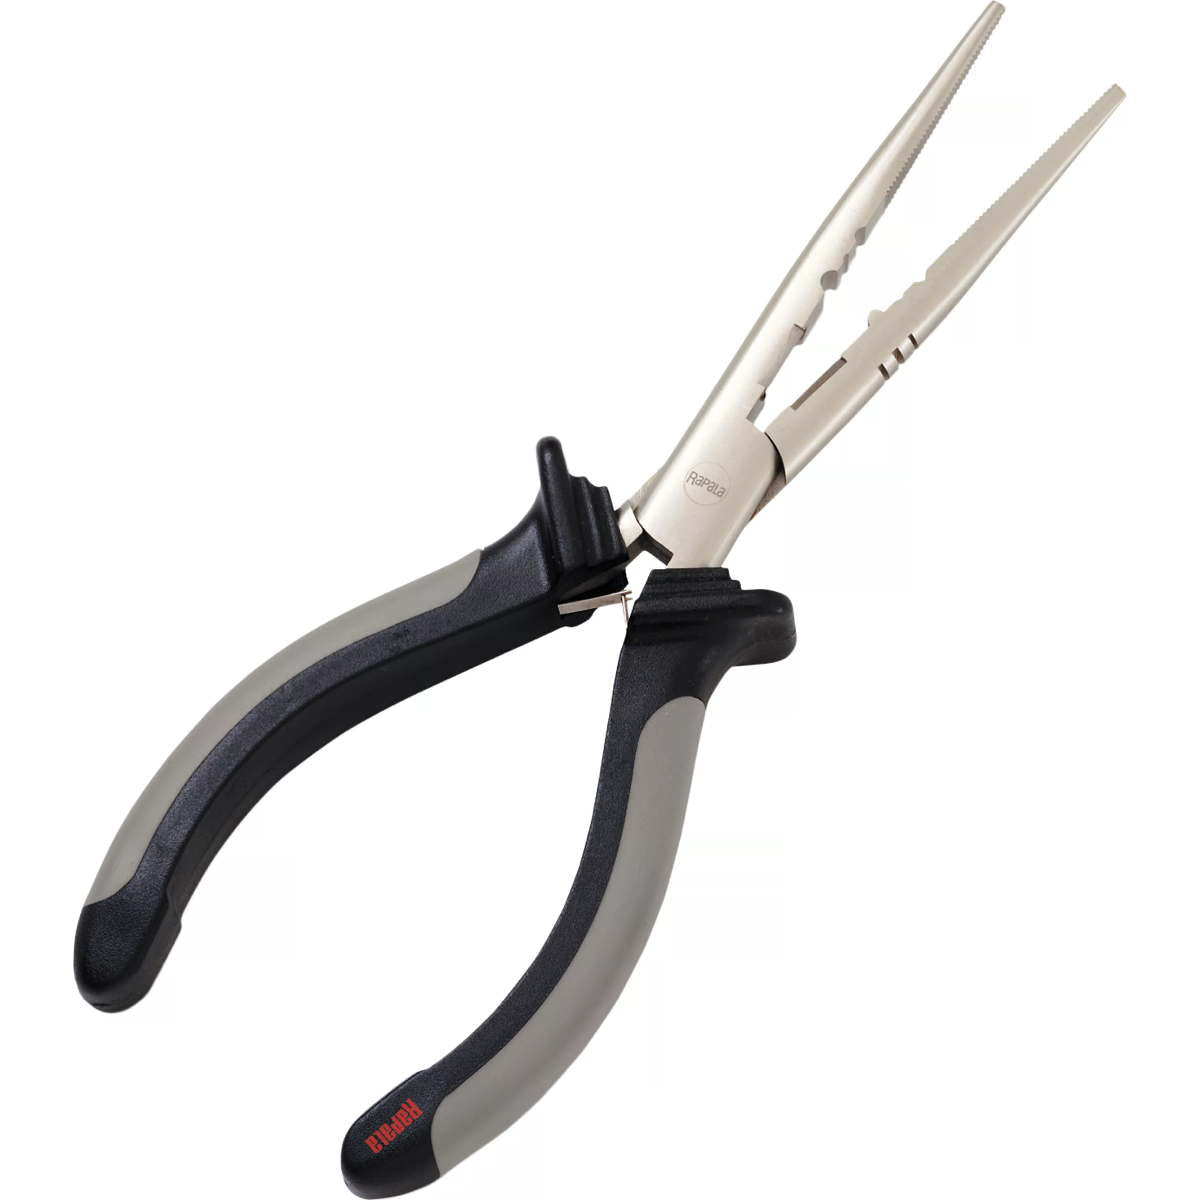 Photo of Rapala Fisherman's Pliers for sale at United Tackle Shops.